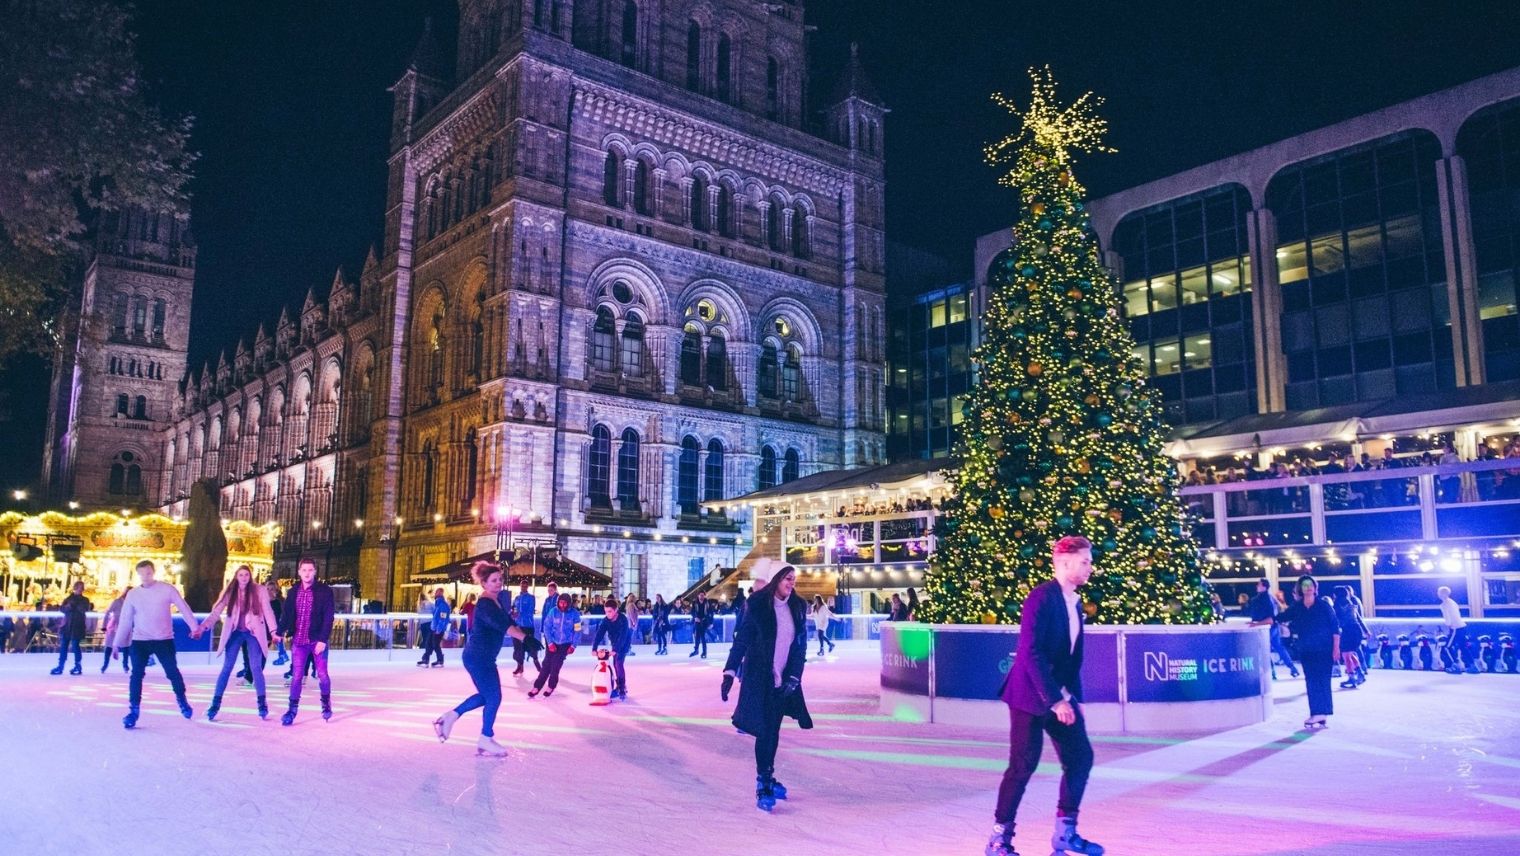 Ice skaters at the Natural History Museum